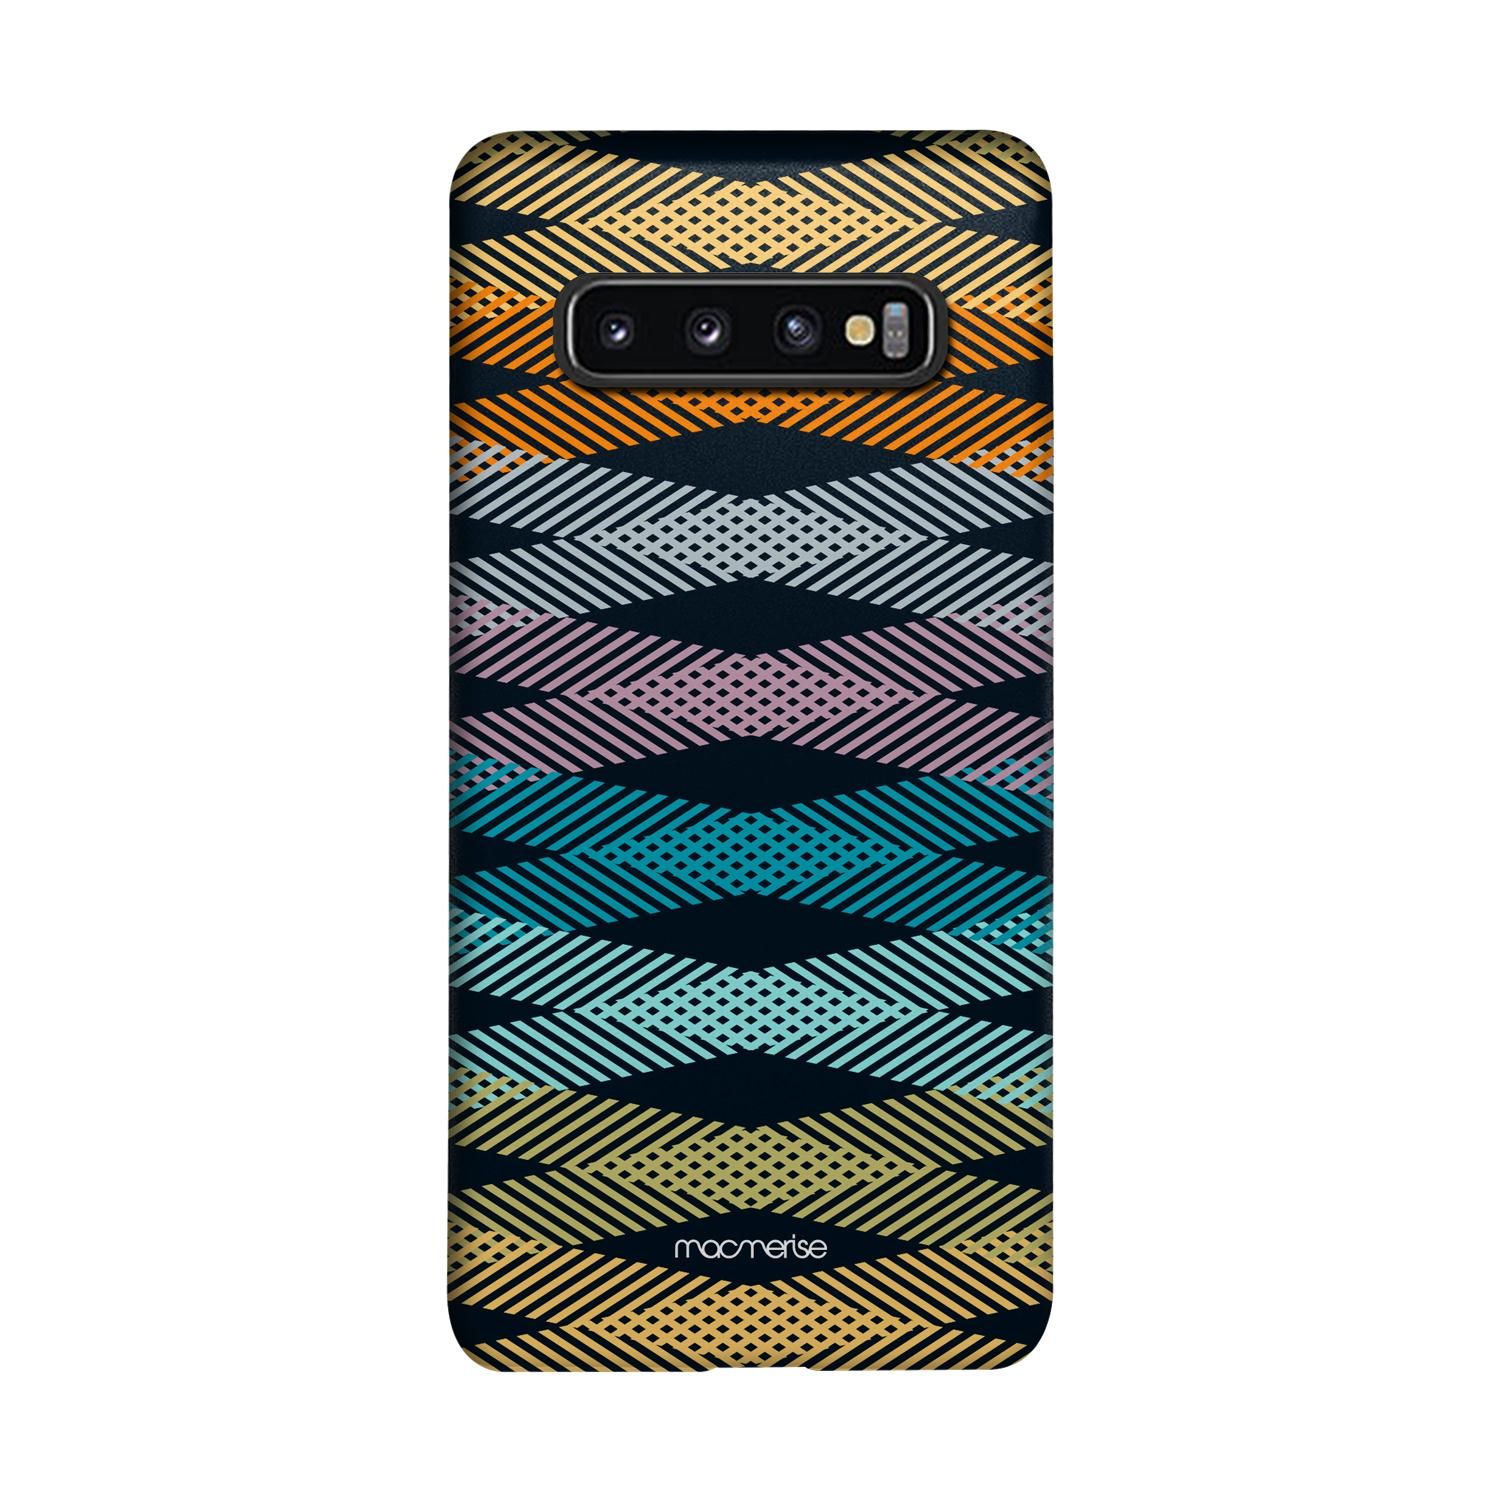 Intertwined - Sleek Case for Samsung S10